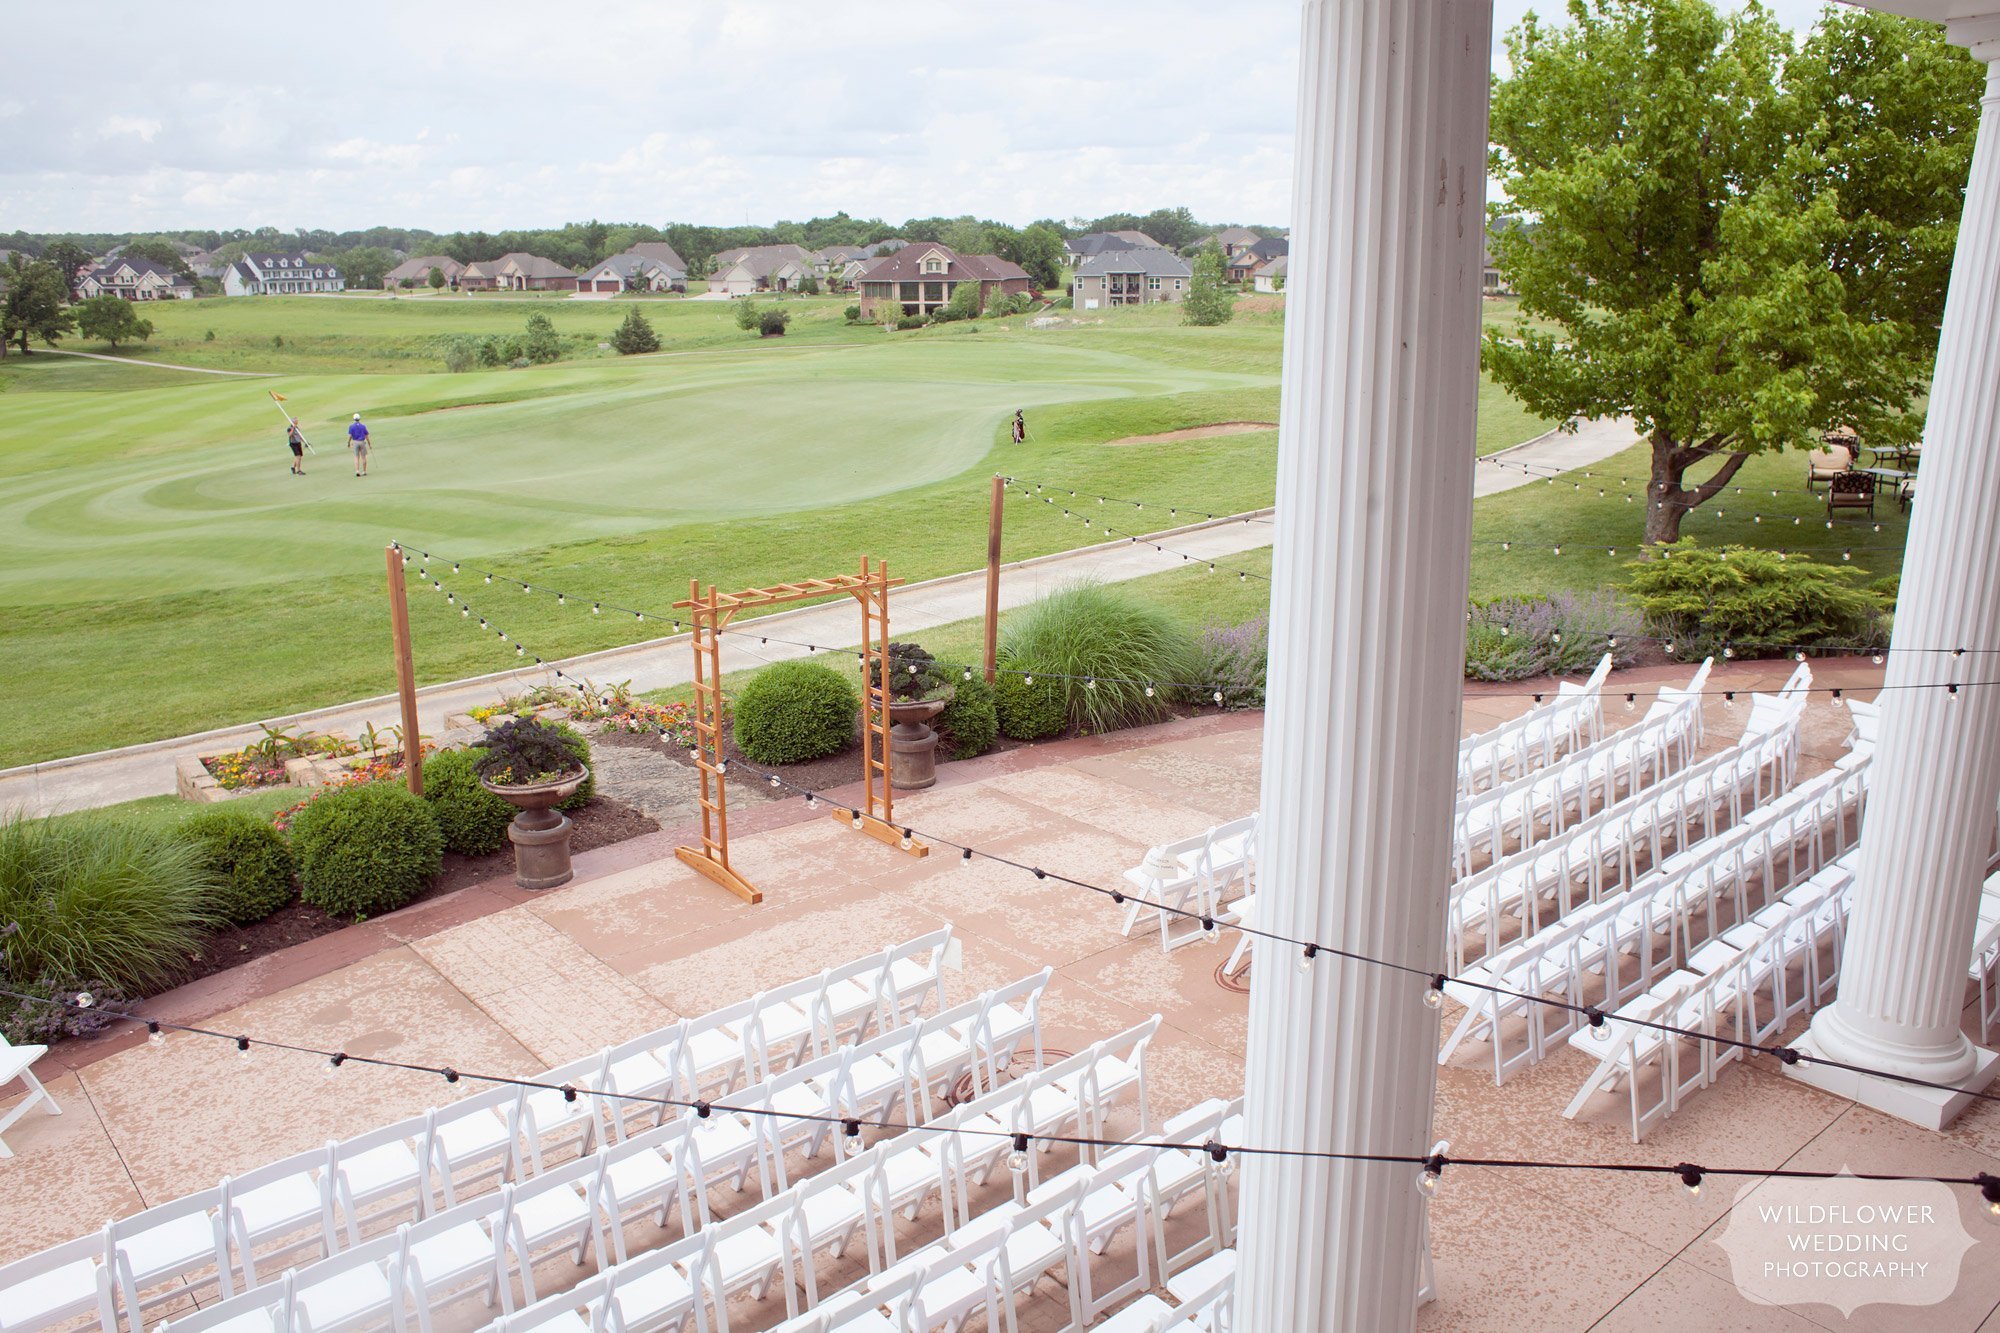 View of the outdoor patio for a wedding ceremony at the Old Hawthorne Country Club venue in Columbia, MO.